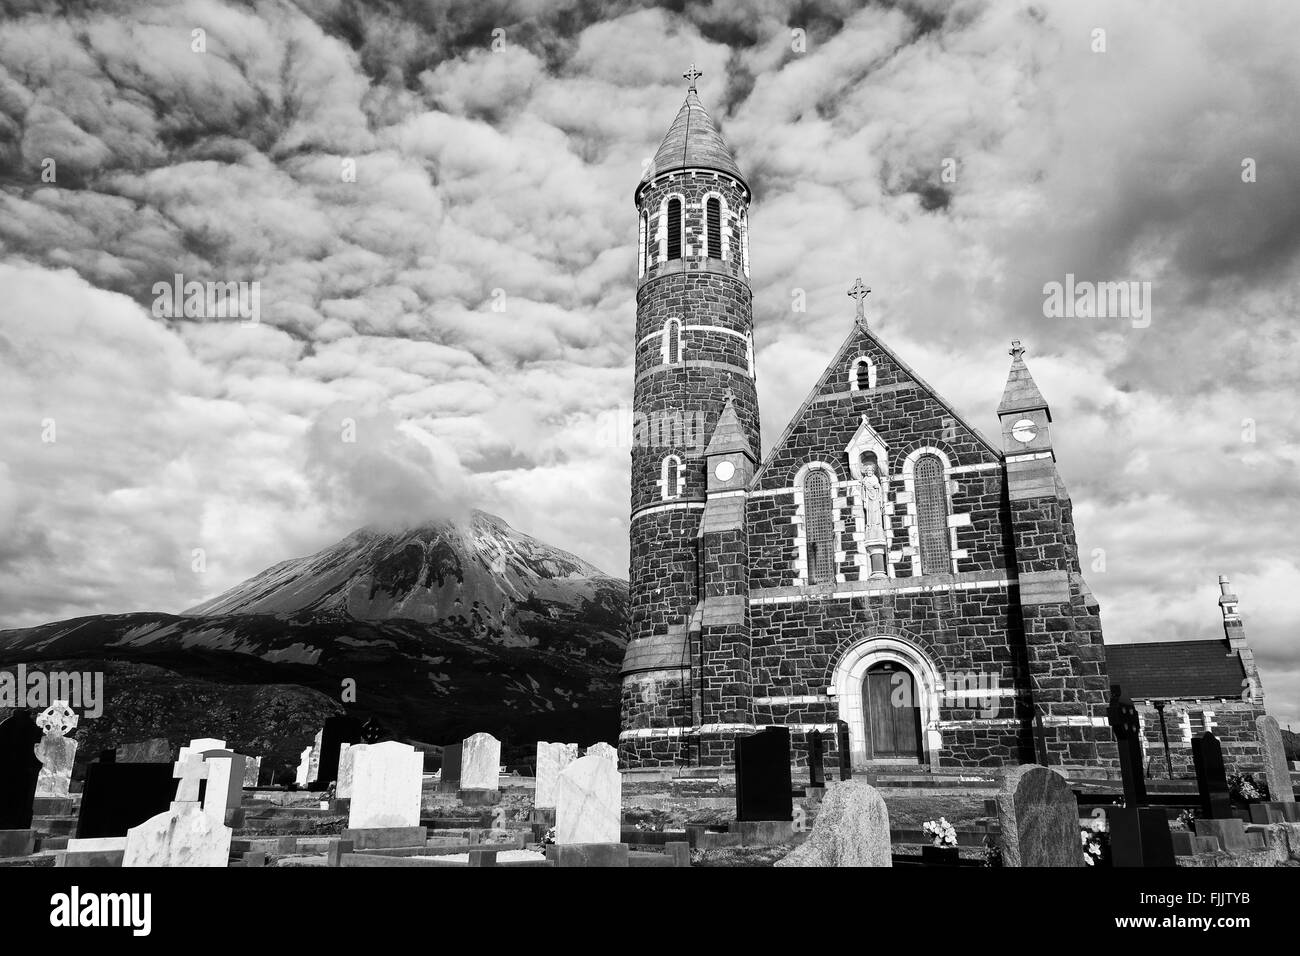 Dunlewy Kirche & Mount Errigal, Dunlewy Dorf, County Donegal, Irland Stockfoto